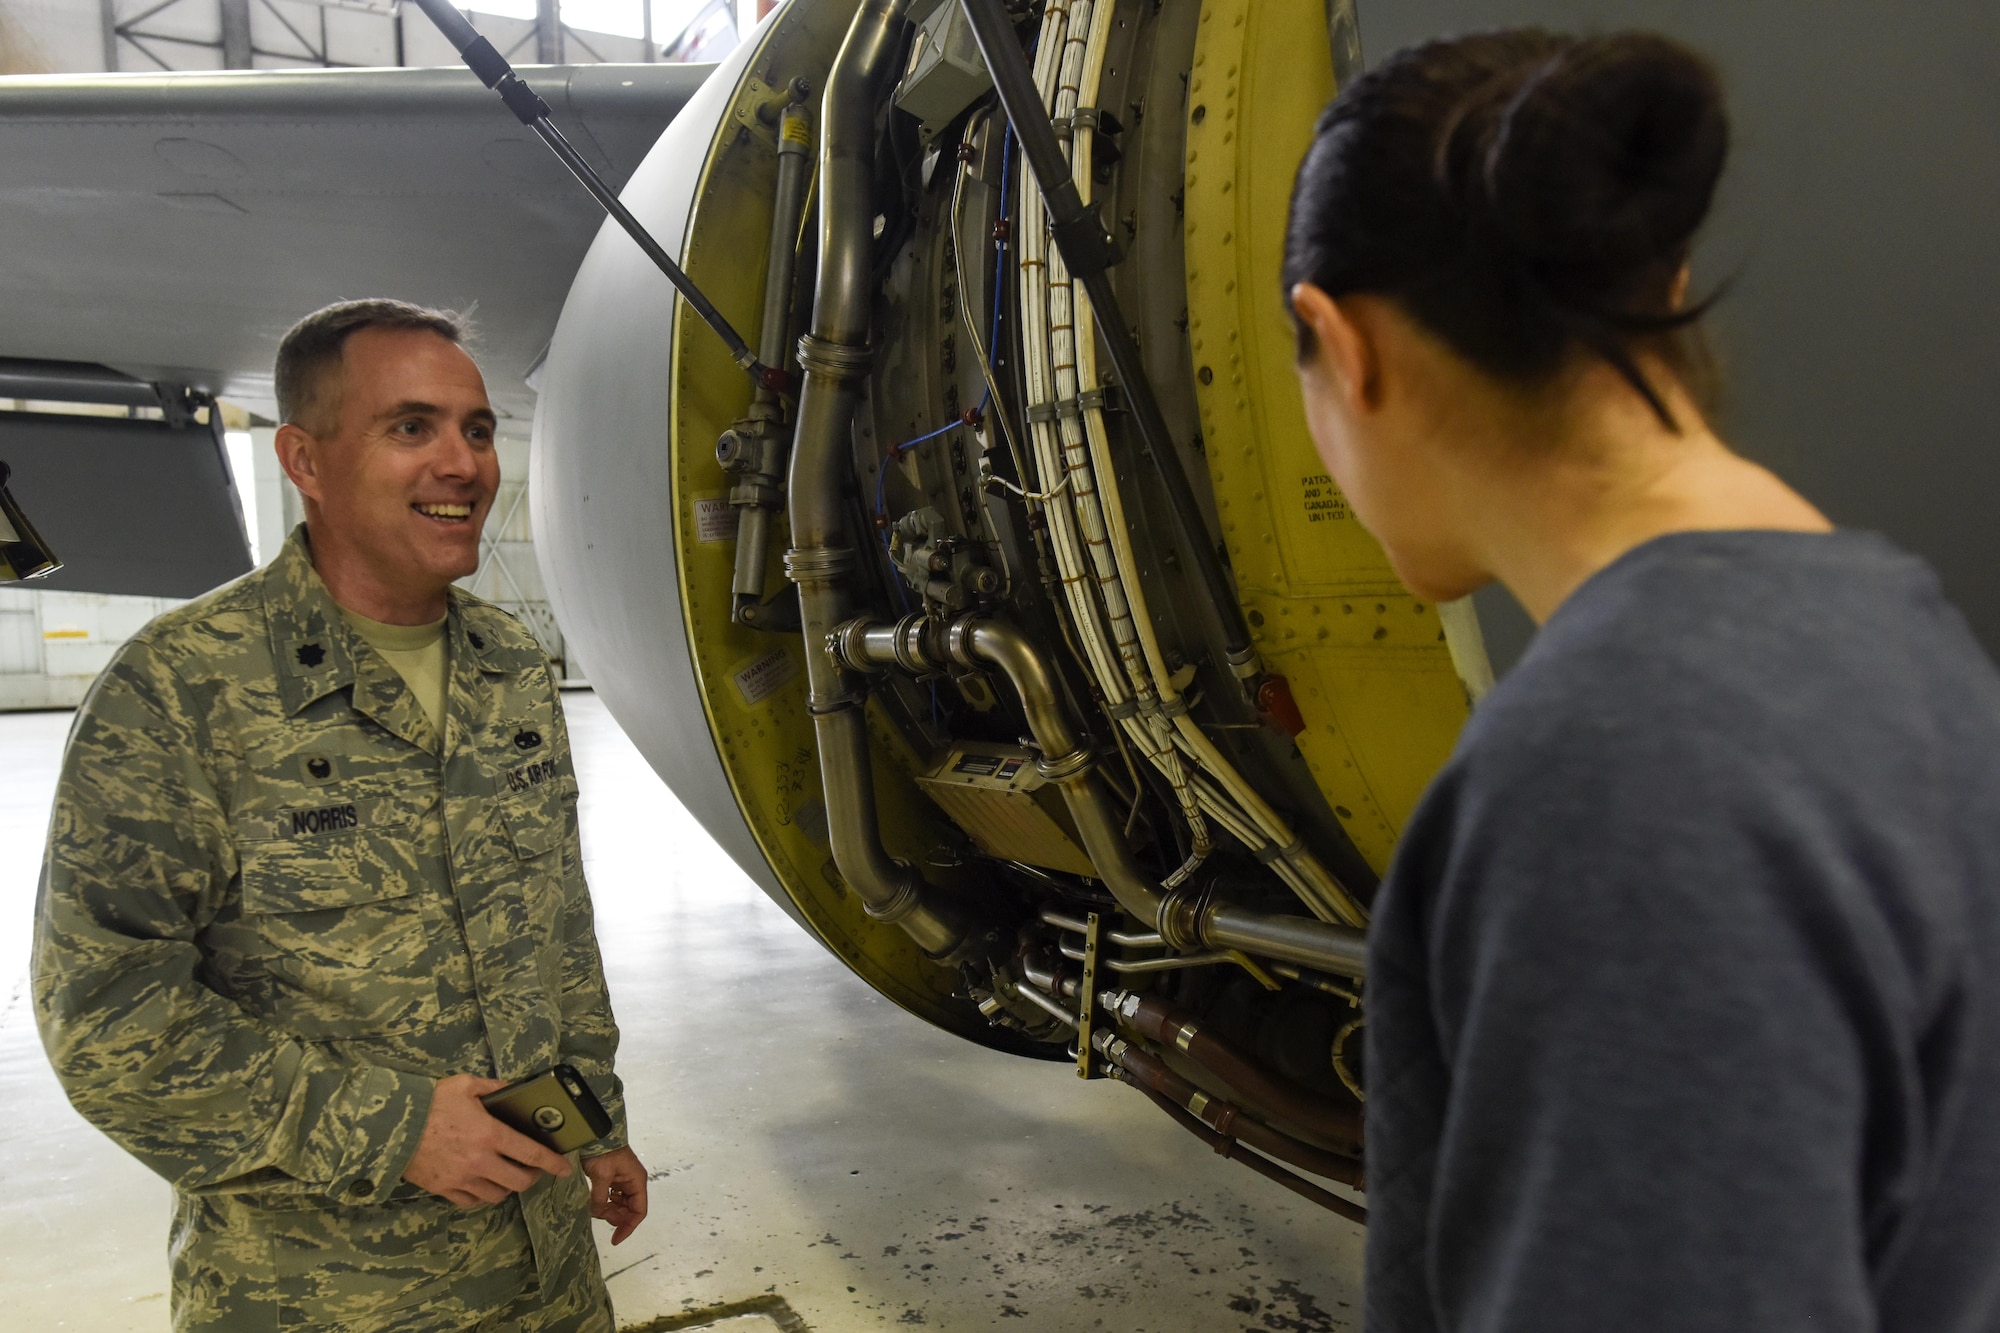 U.S. Air Force Lt. Col. Thomas Norris, 121st Air Refueling Wing Aircraft Maintenance Squadron Commander, gives a new recruit a tour of a KC-135 Stratotanker on Jan. 21, 2017 at Rickenbacker Air National Guard Base, Ohio. Lt. Col. Norris was recently awarded the 2017 Lieutenant General Leo Marquez Award of Maintenance Excellence for field grade officers for the Air National Guard. (U.S. Air National Guard photo by Senior Airman Wendy Kuhn)